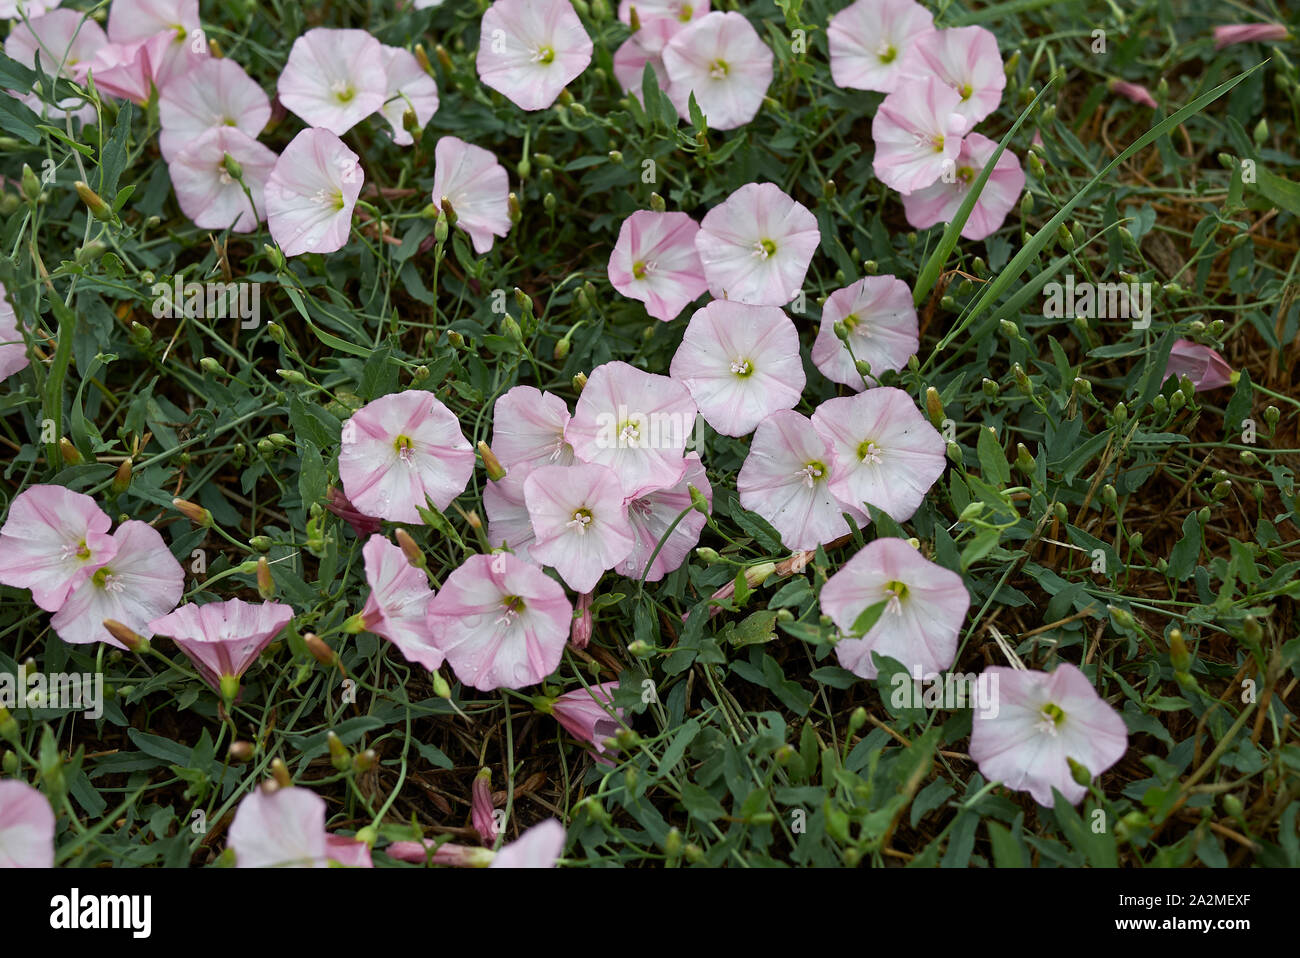 Convolvulus arvensis whith pink and white flowers Stock Photo